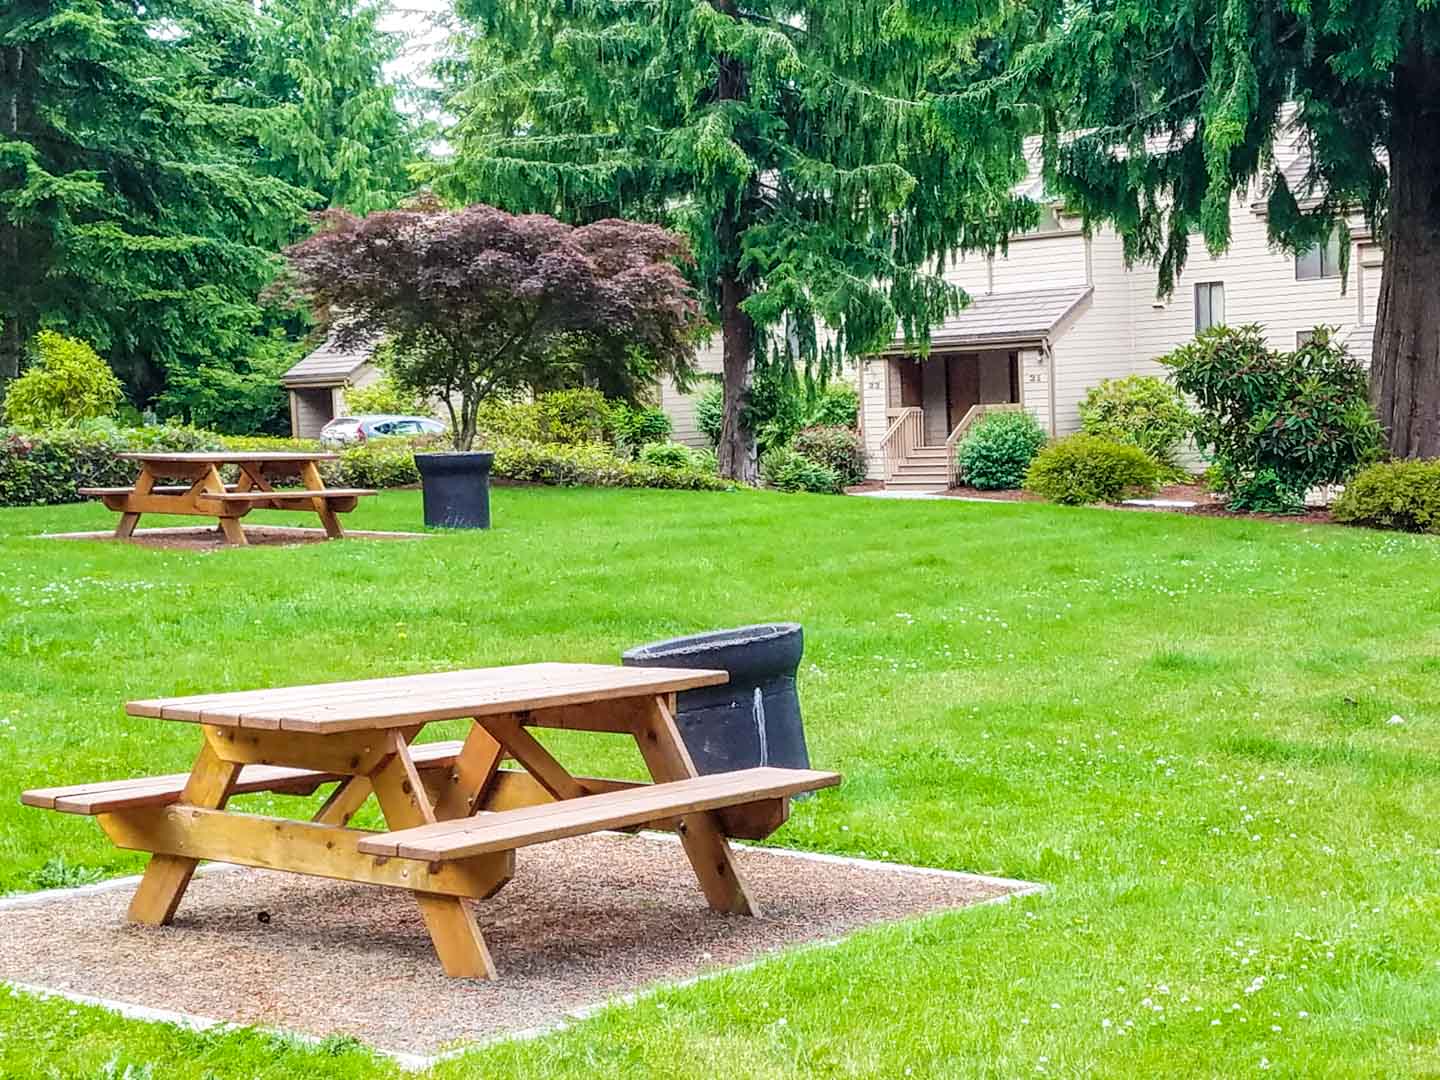 An outdoor picnic area at VRI's Kala Point Village in Port Townsend, Washington.